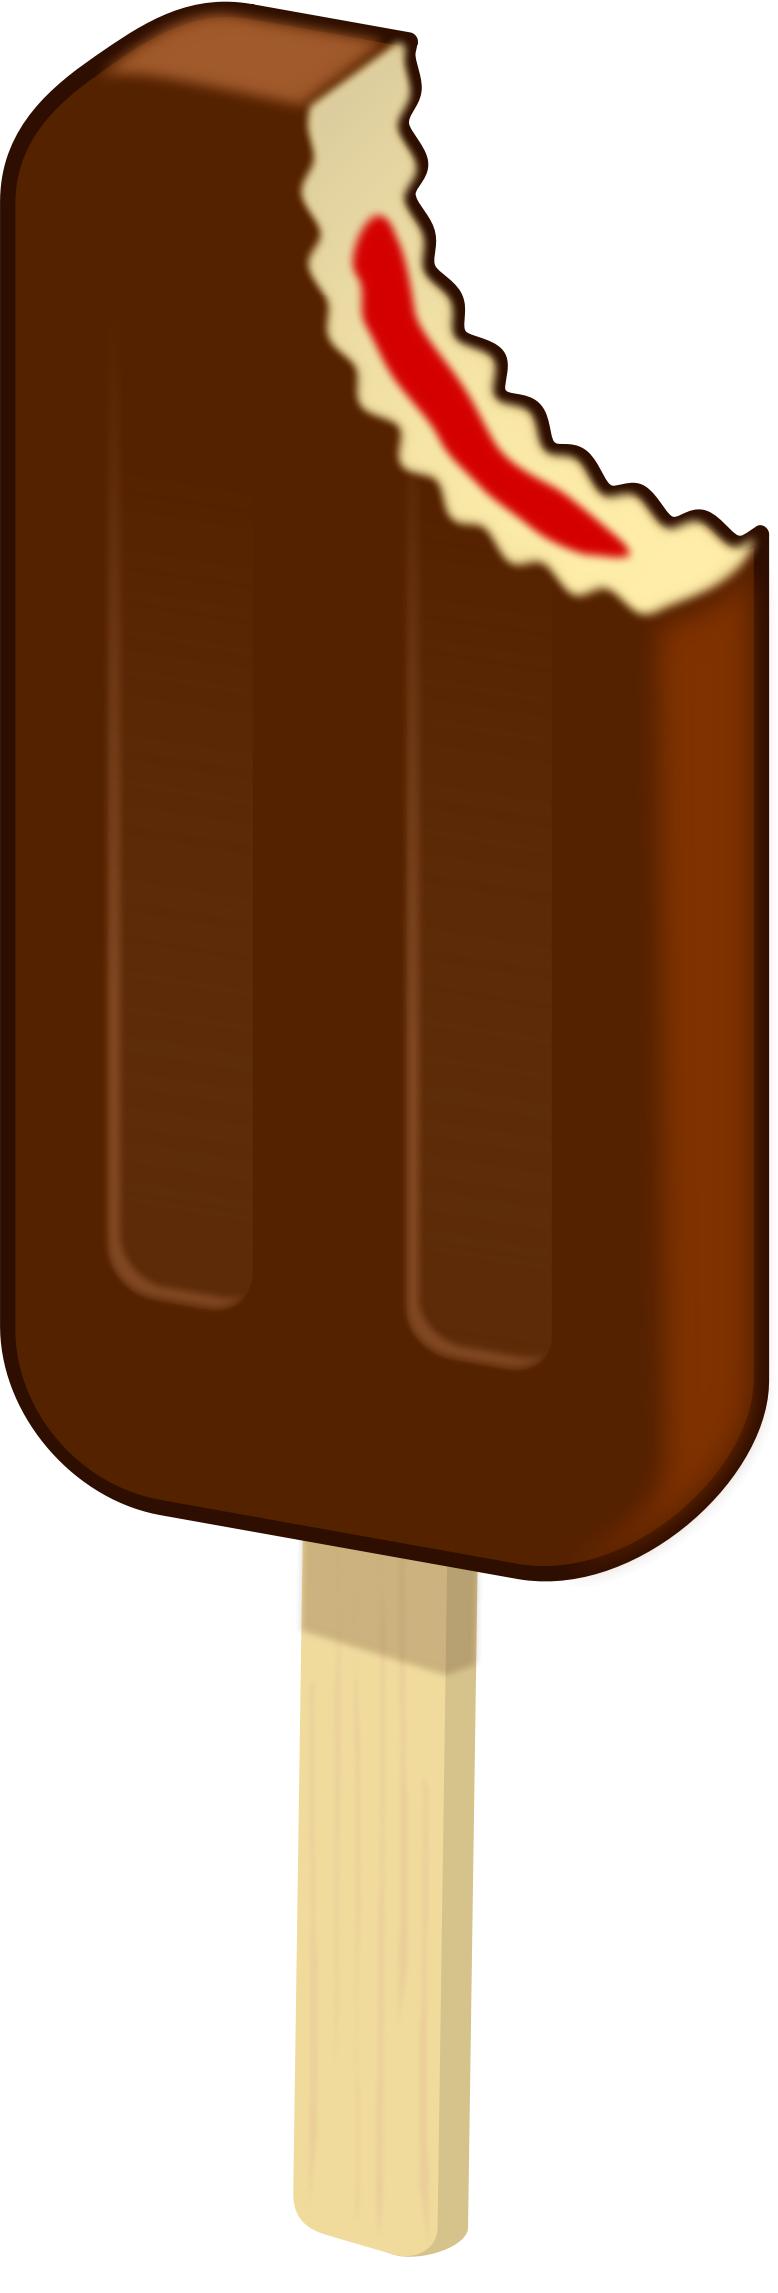 Popsicles Chocolate png